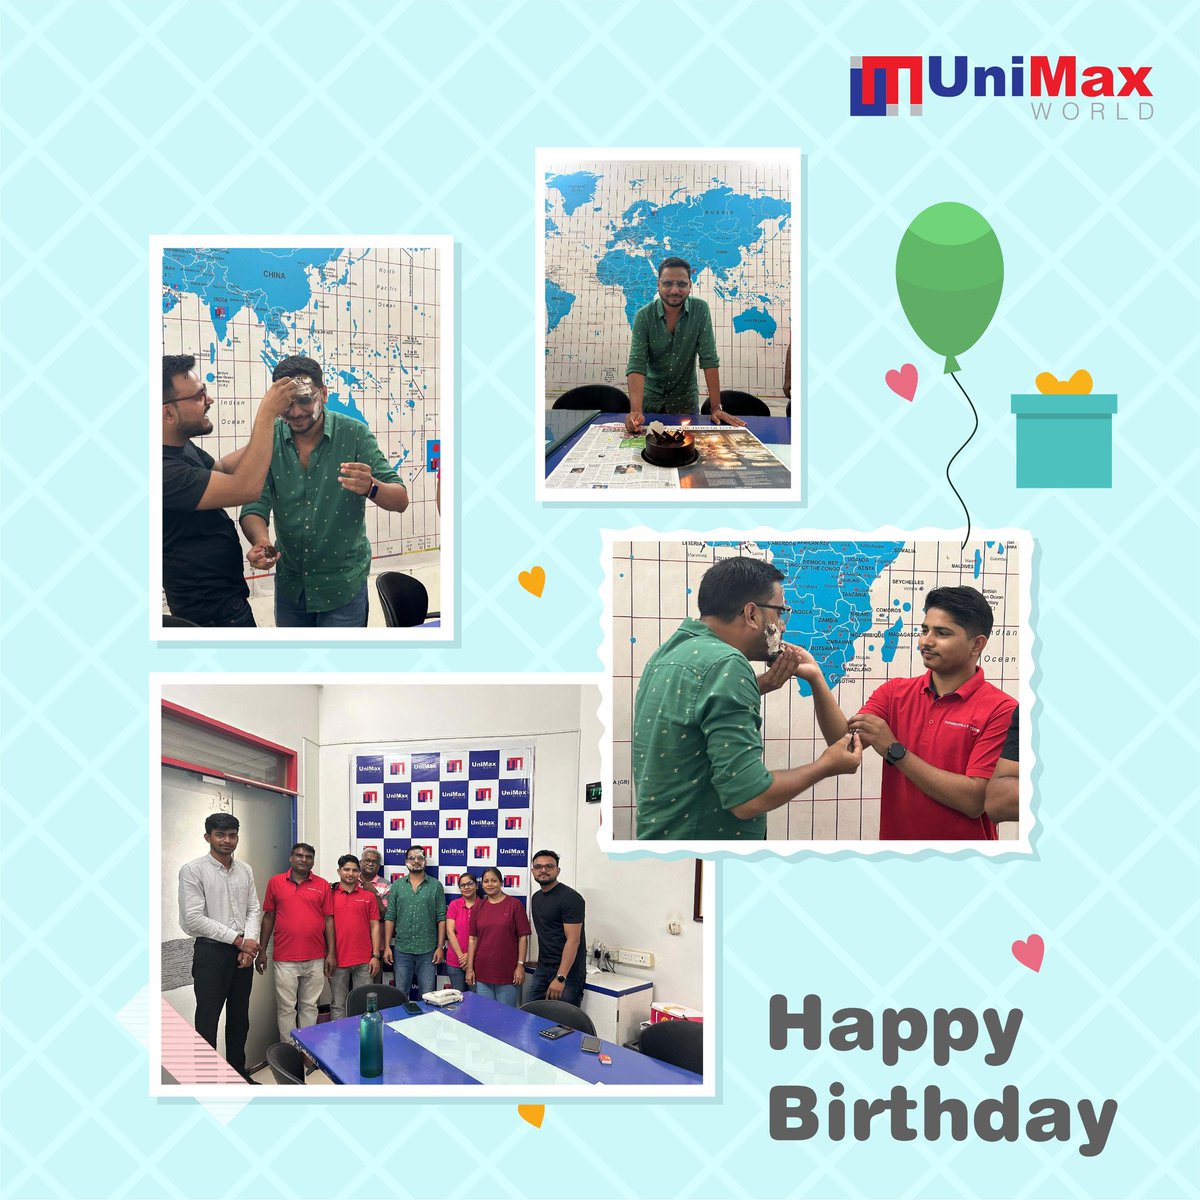 Happy Birthday to our phenomenal Sales Manager!  Here's to celebrating a dedicated employee who is an integral part of UniMax World family.

#UnimaxWorld #HappyBirthday #PhenomenalSalesManager  #DedicatedEmployee #CelebratingTogether #TeamAppreciation #BirthdayWishes